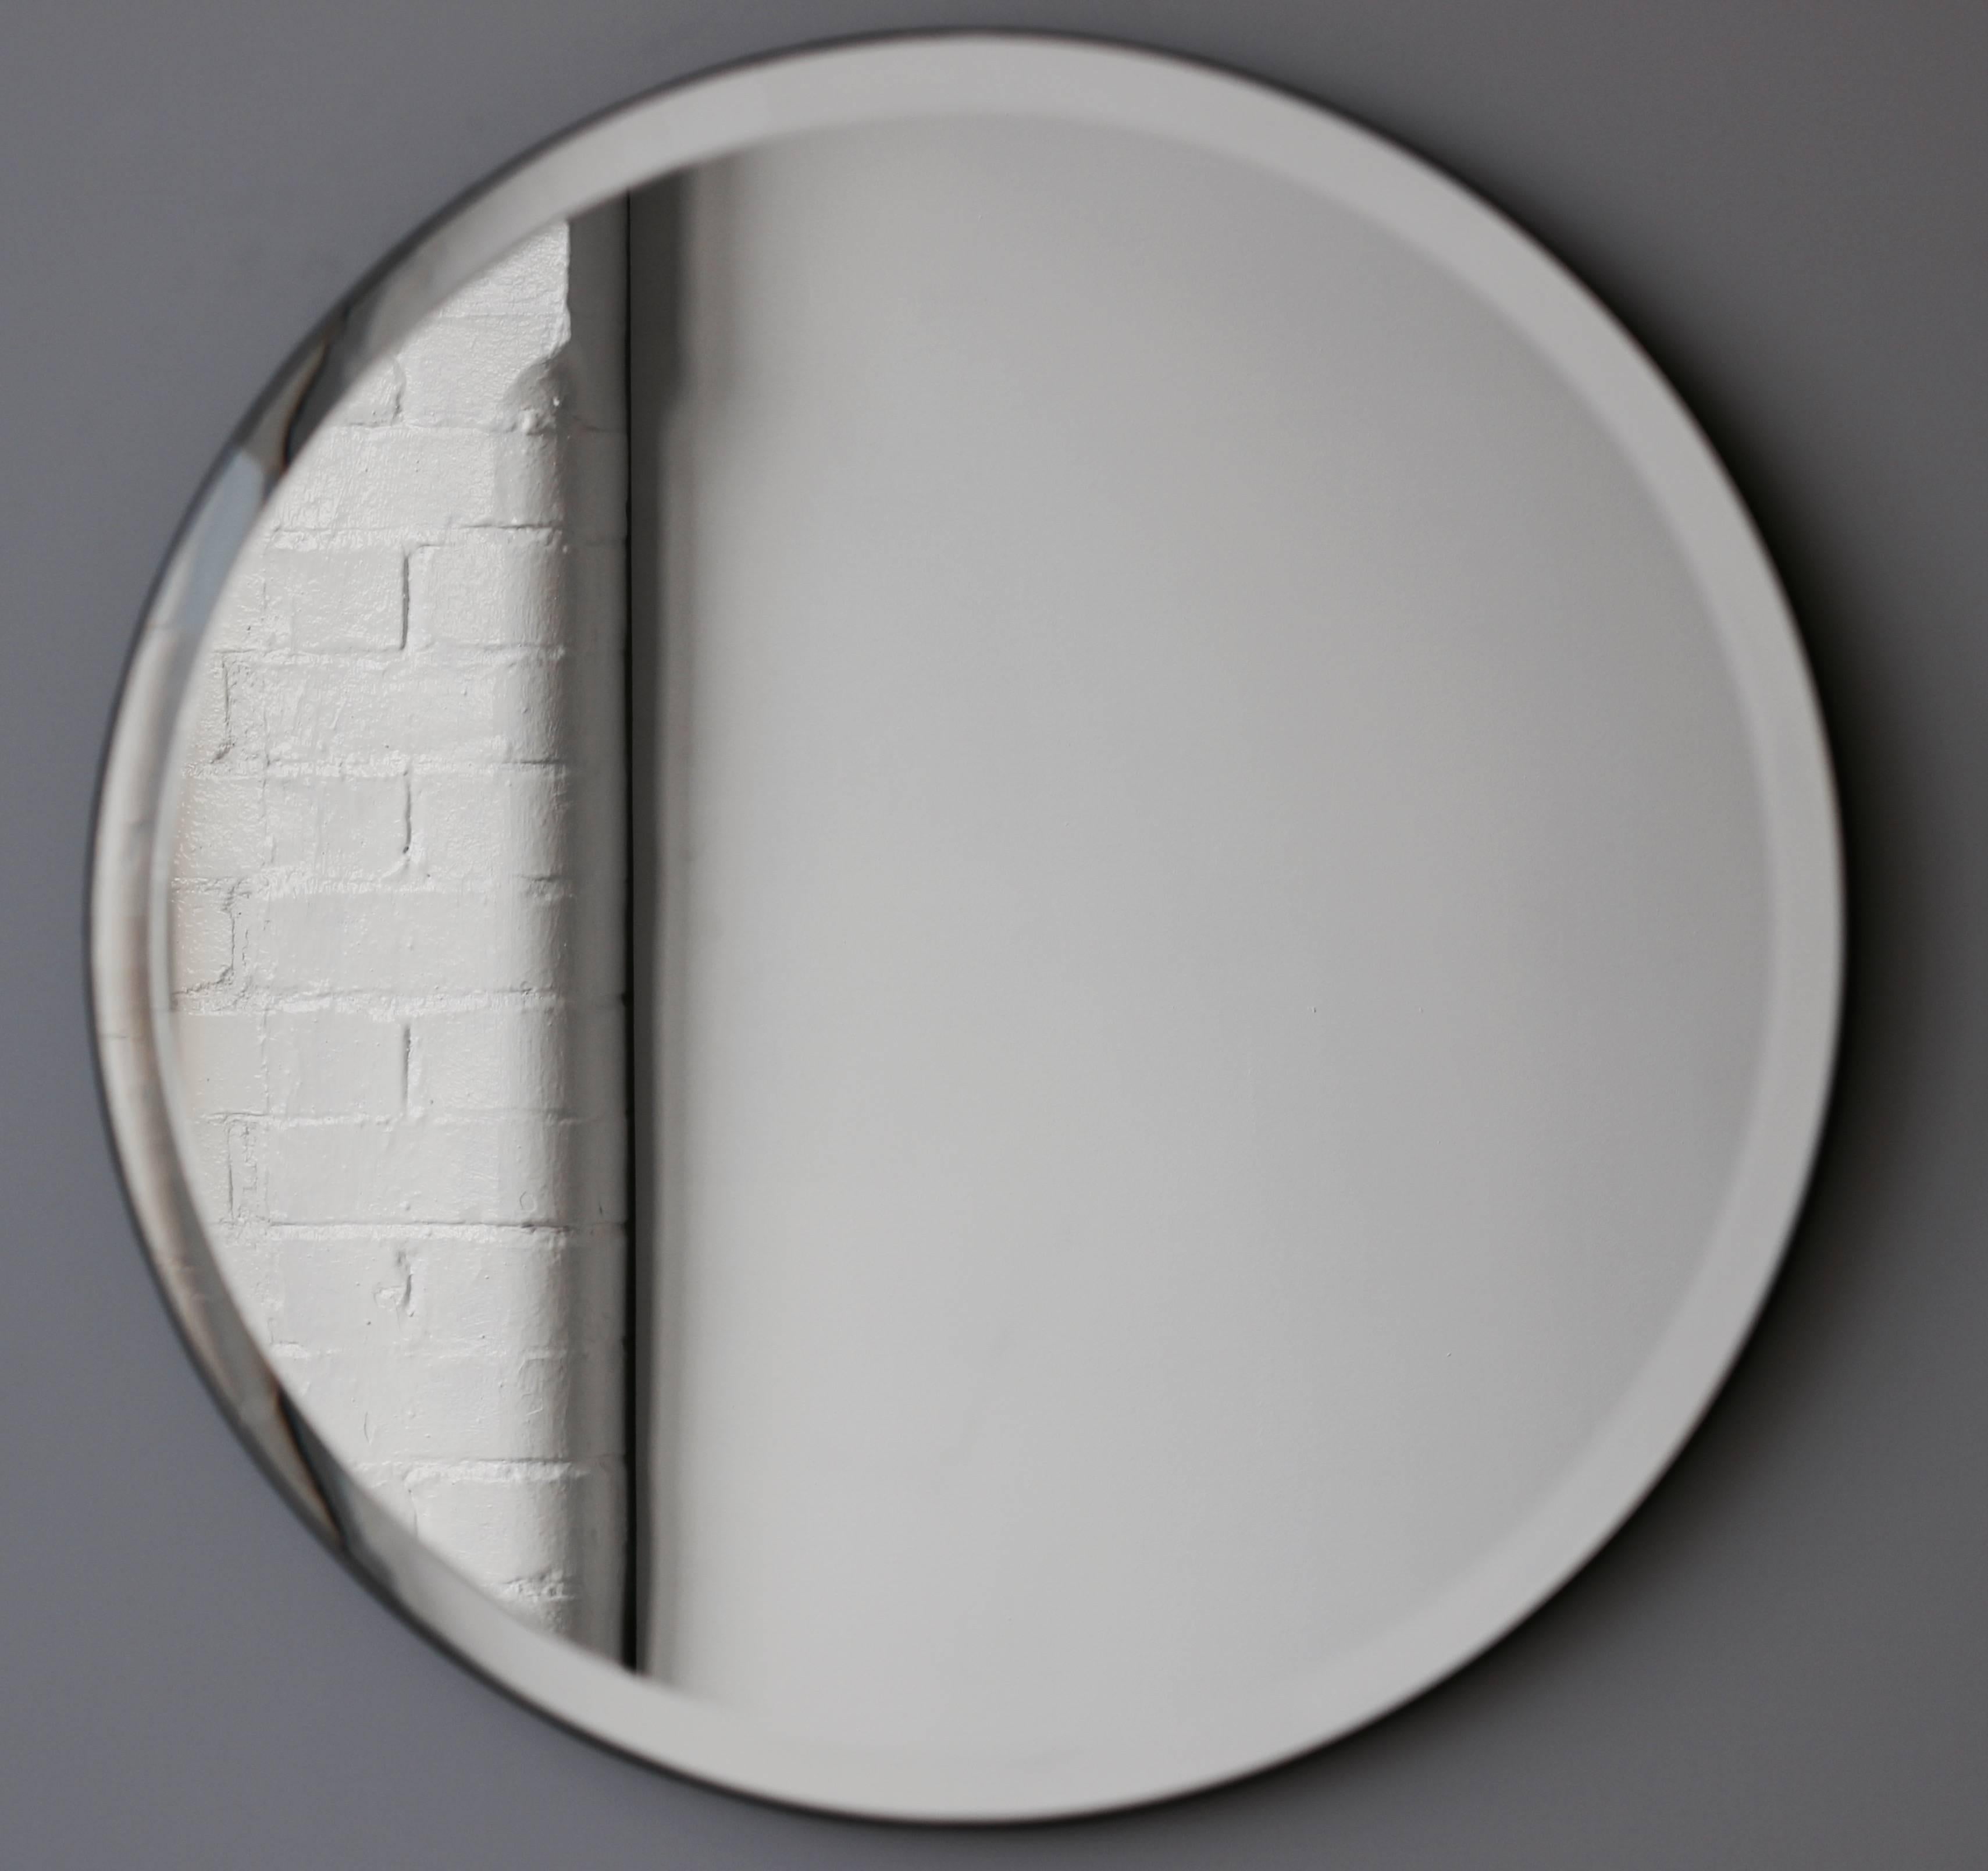 Delightful frameless mirror with an elegant bevel and velvet backing. Designed and handcrafted in London, UK.

Fitted with a brass hook or an aluminium z-bar depending on the size of the mirror. Also available on demand with a split batten system to